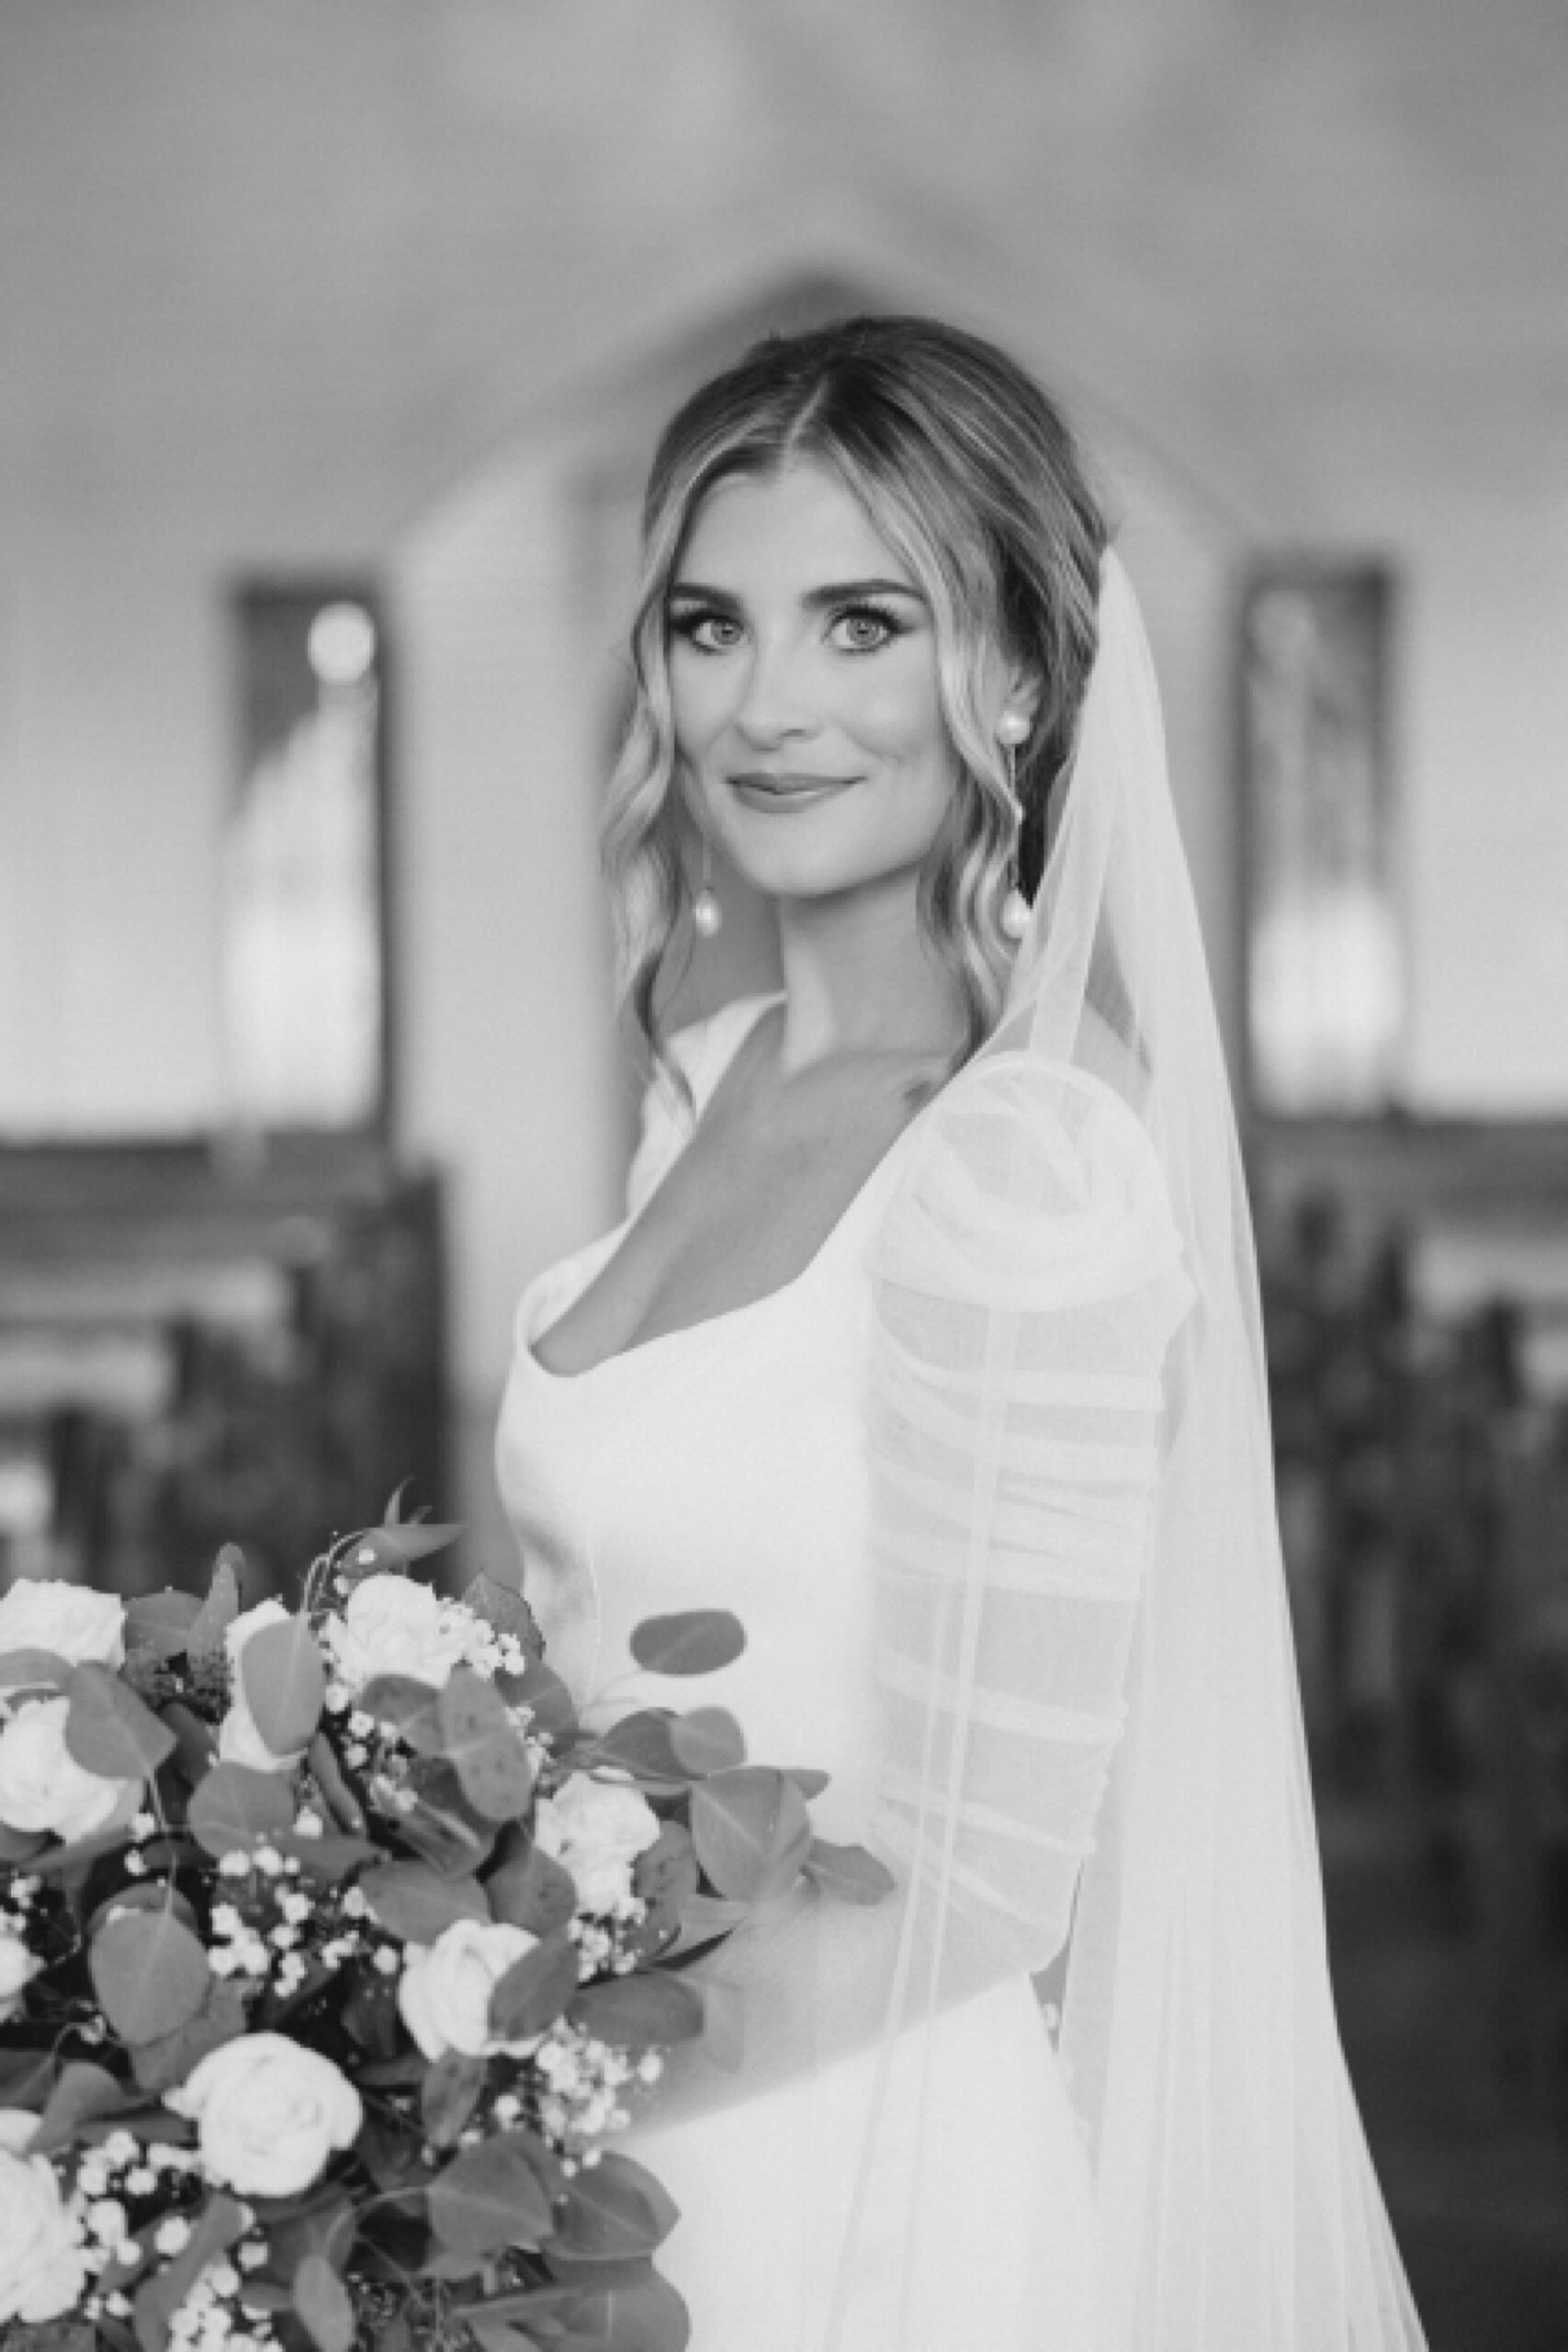 bride stands in between pews of chapel at The Brooks at Weatherford